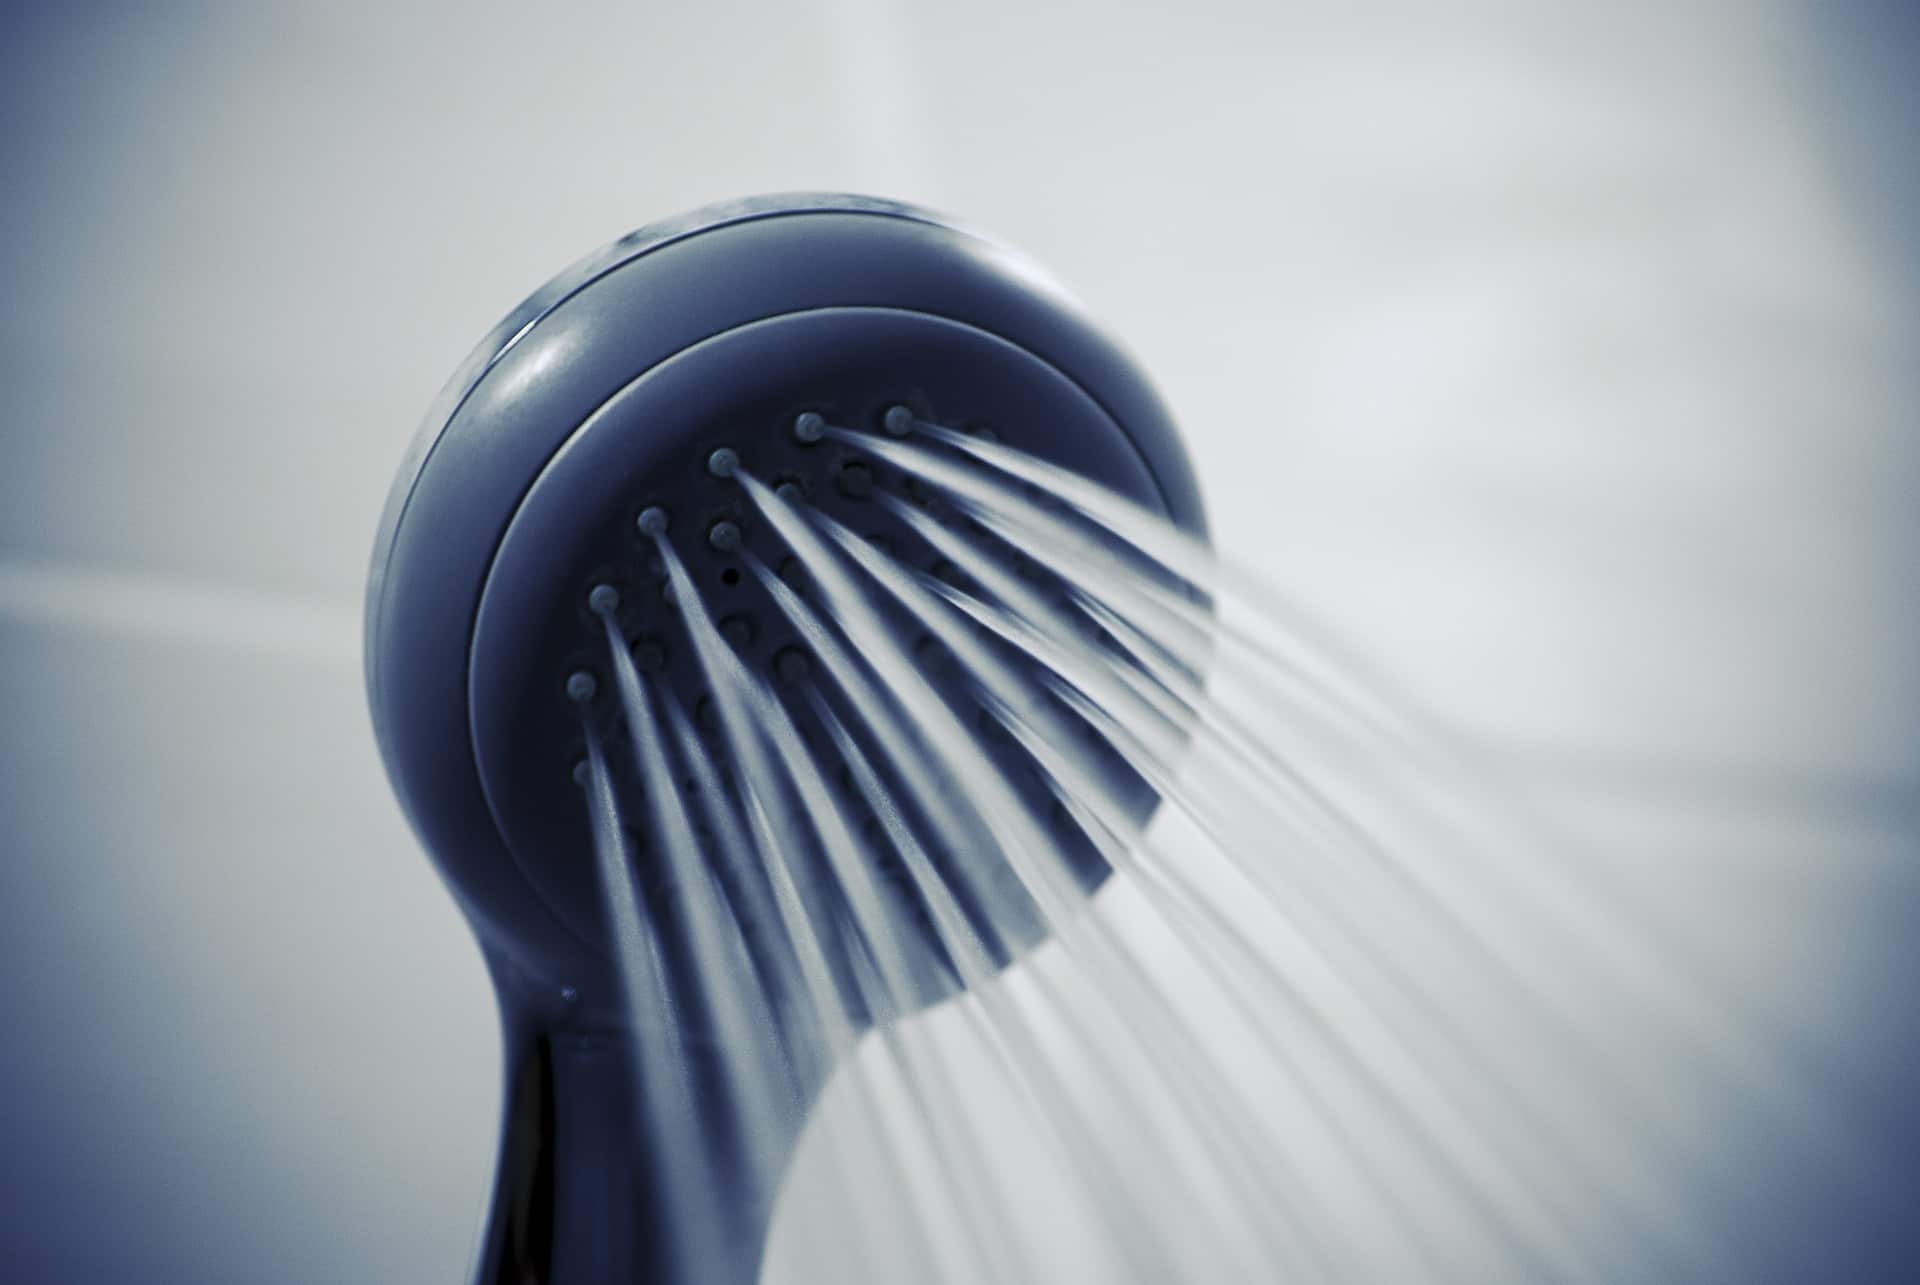 What to Do if the Shower is Leaking